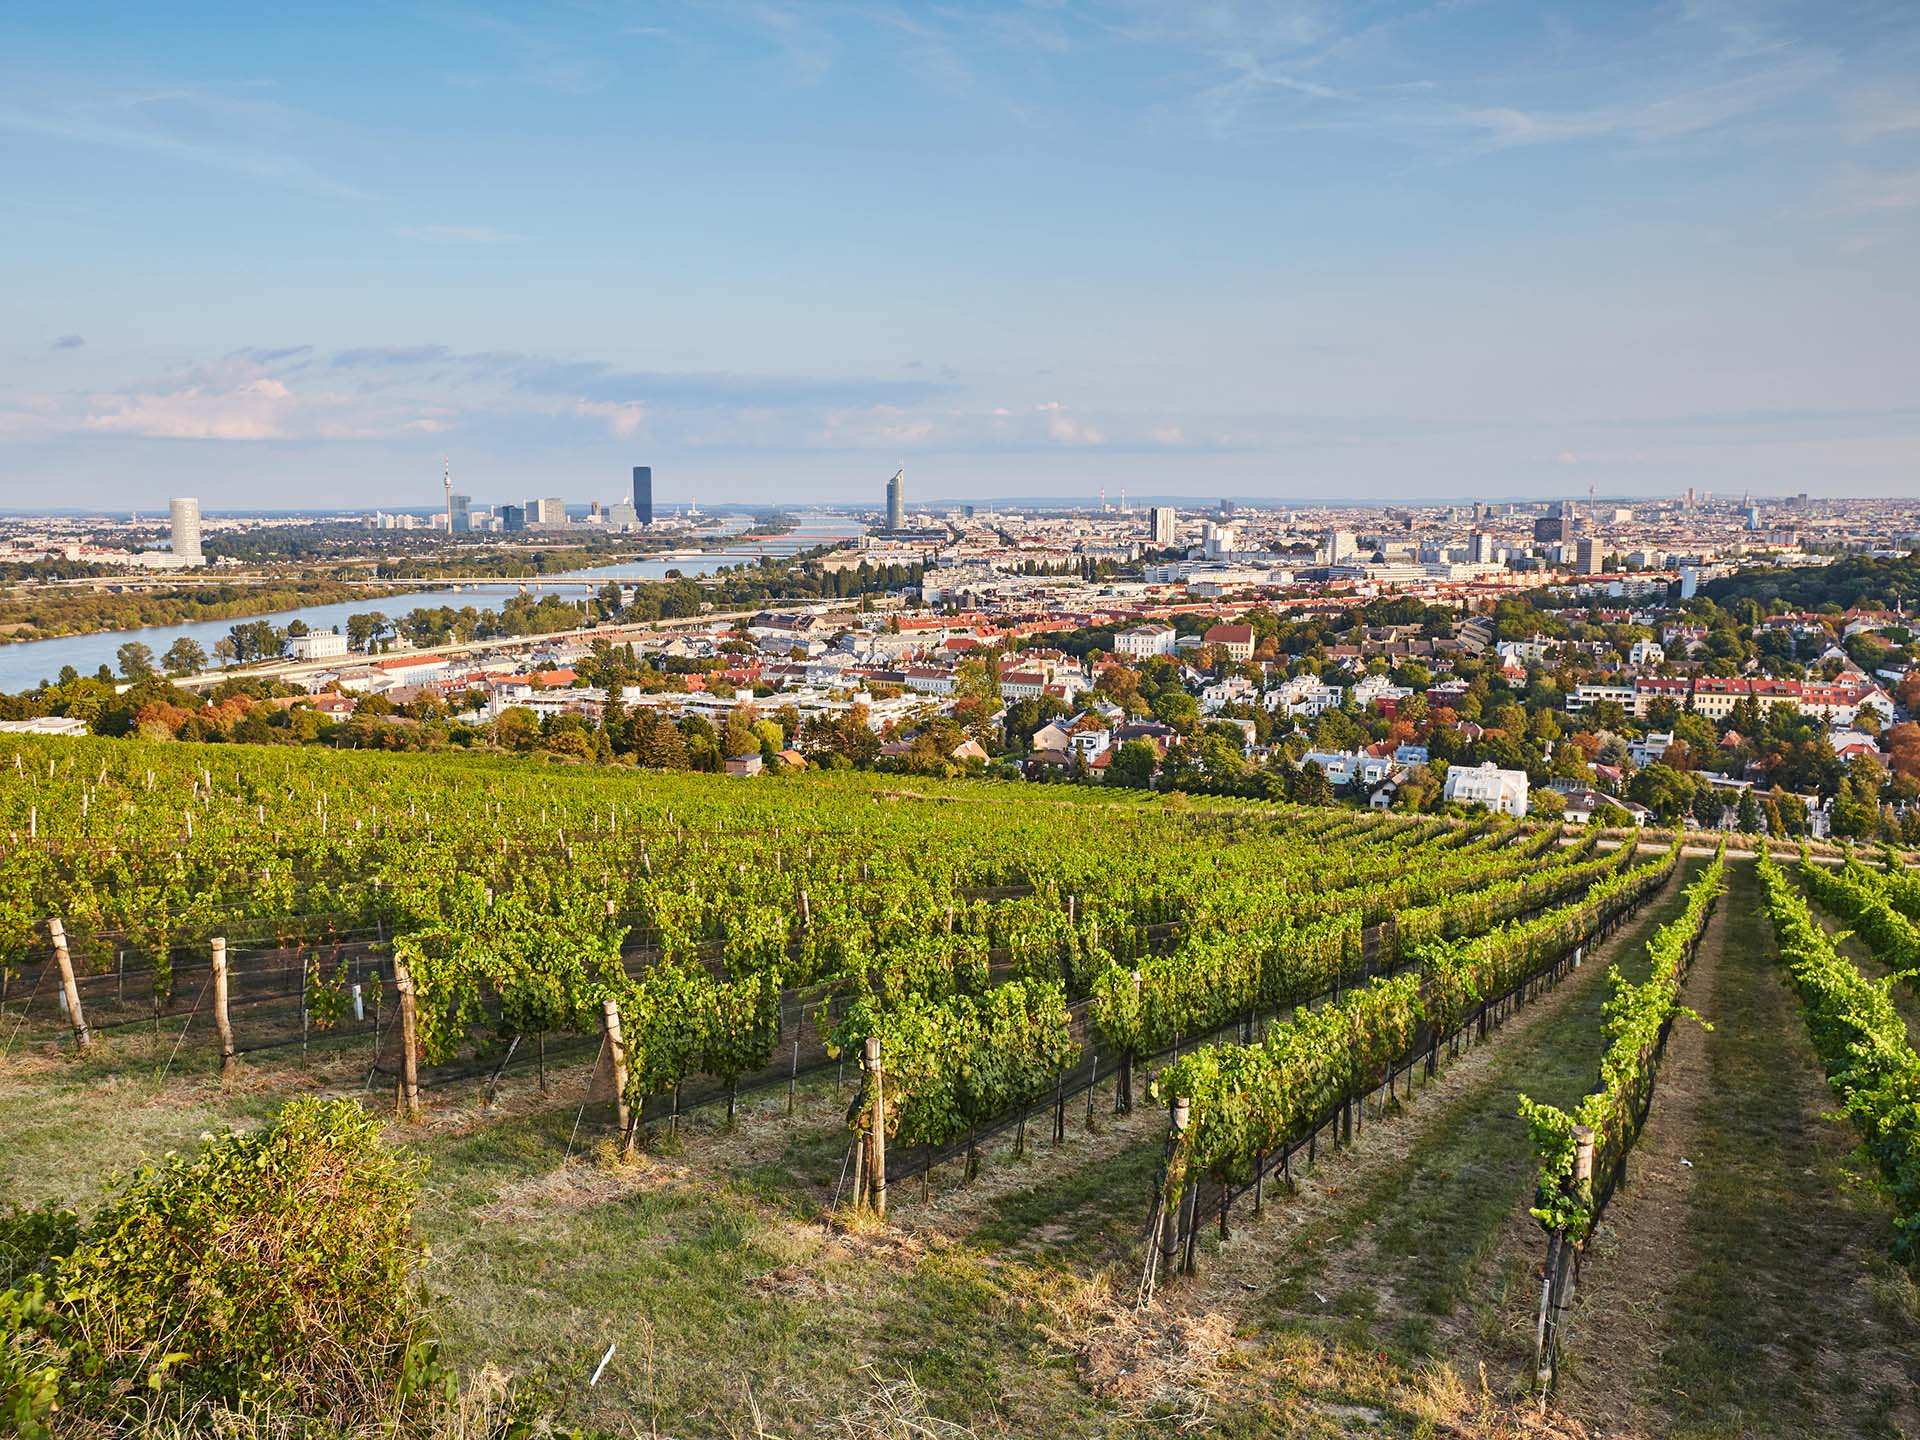 Viennese vineyards with the city in the background